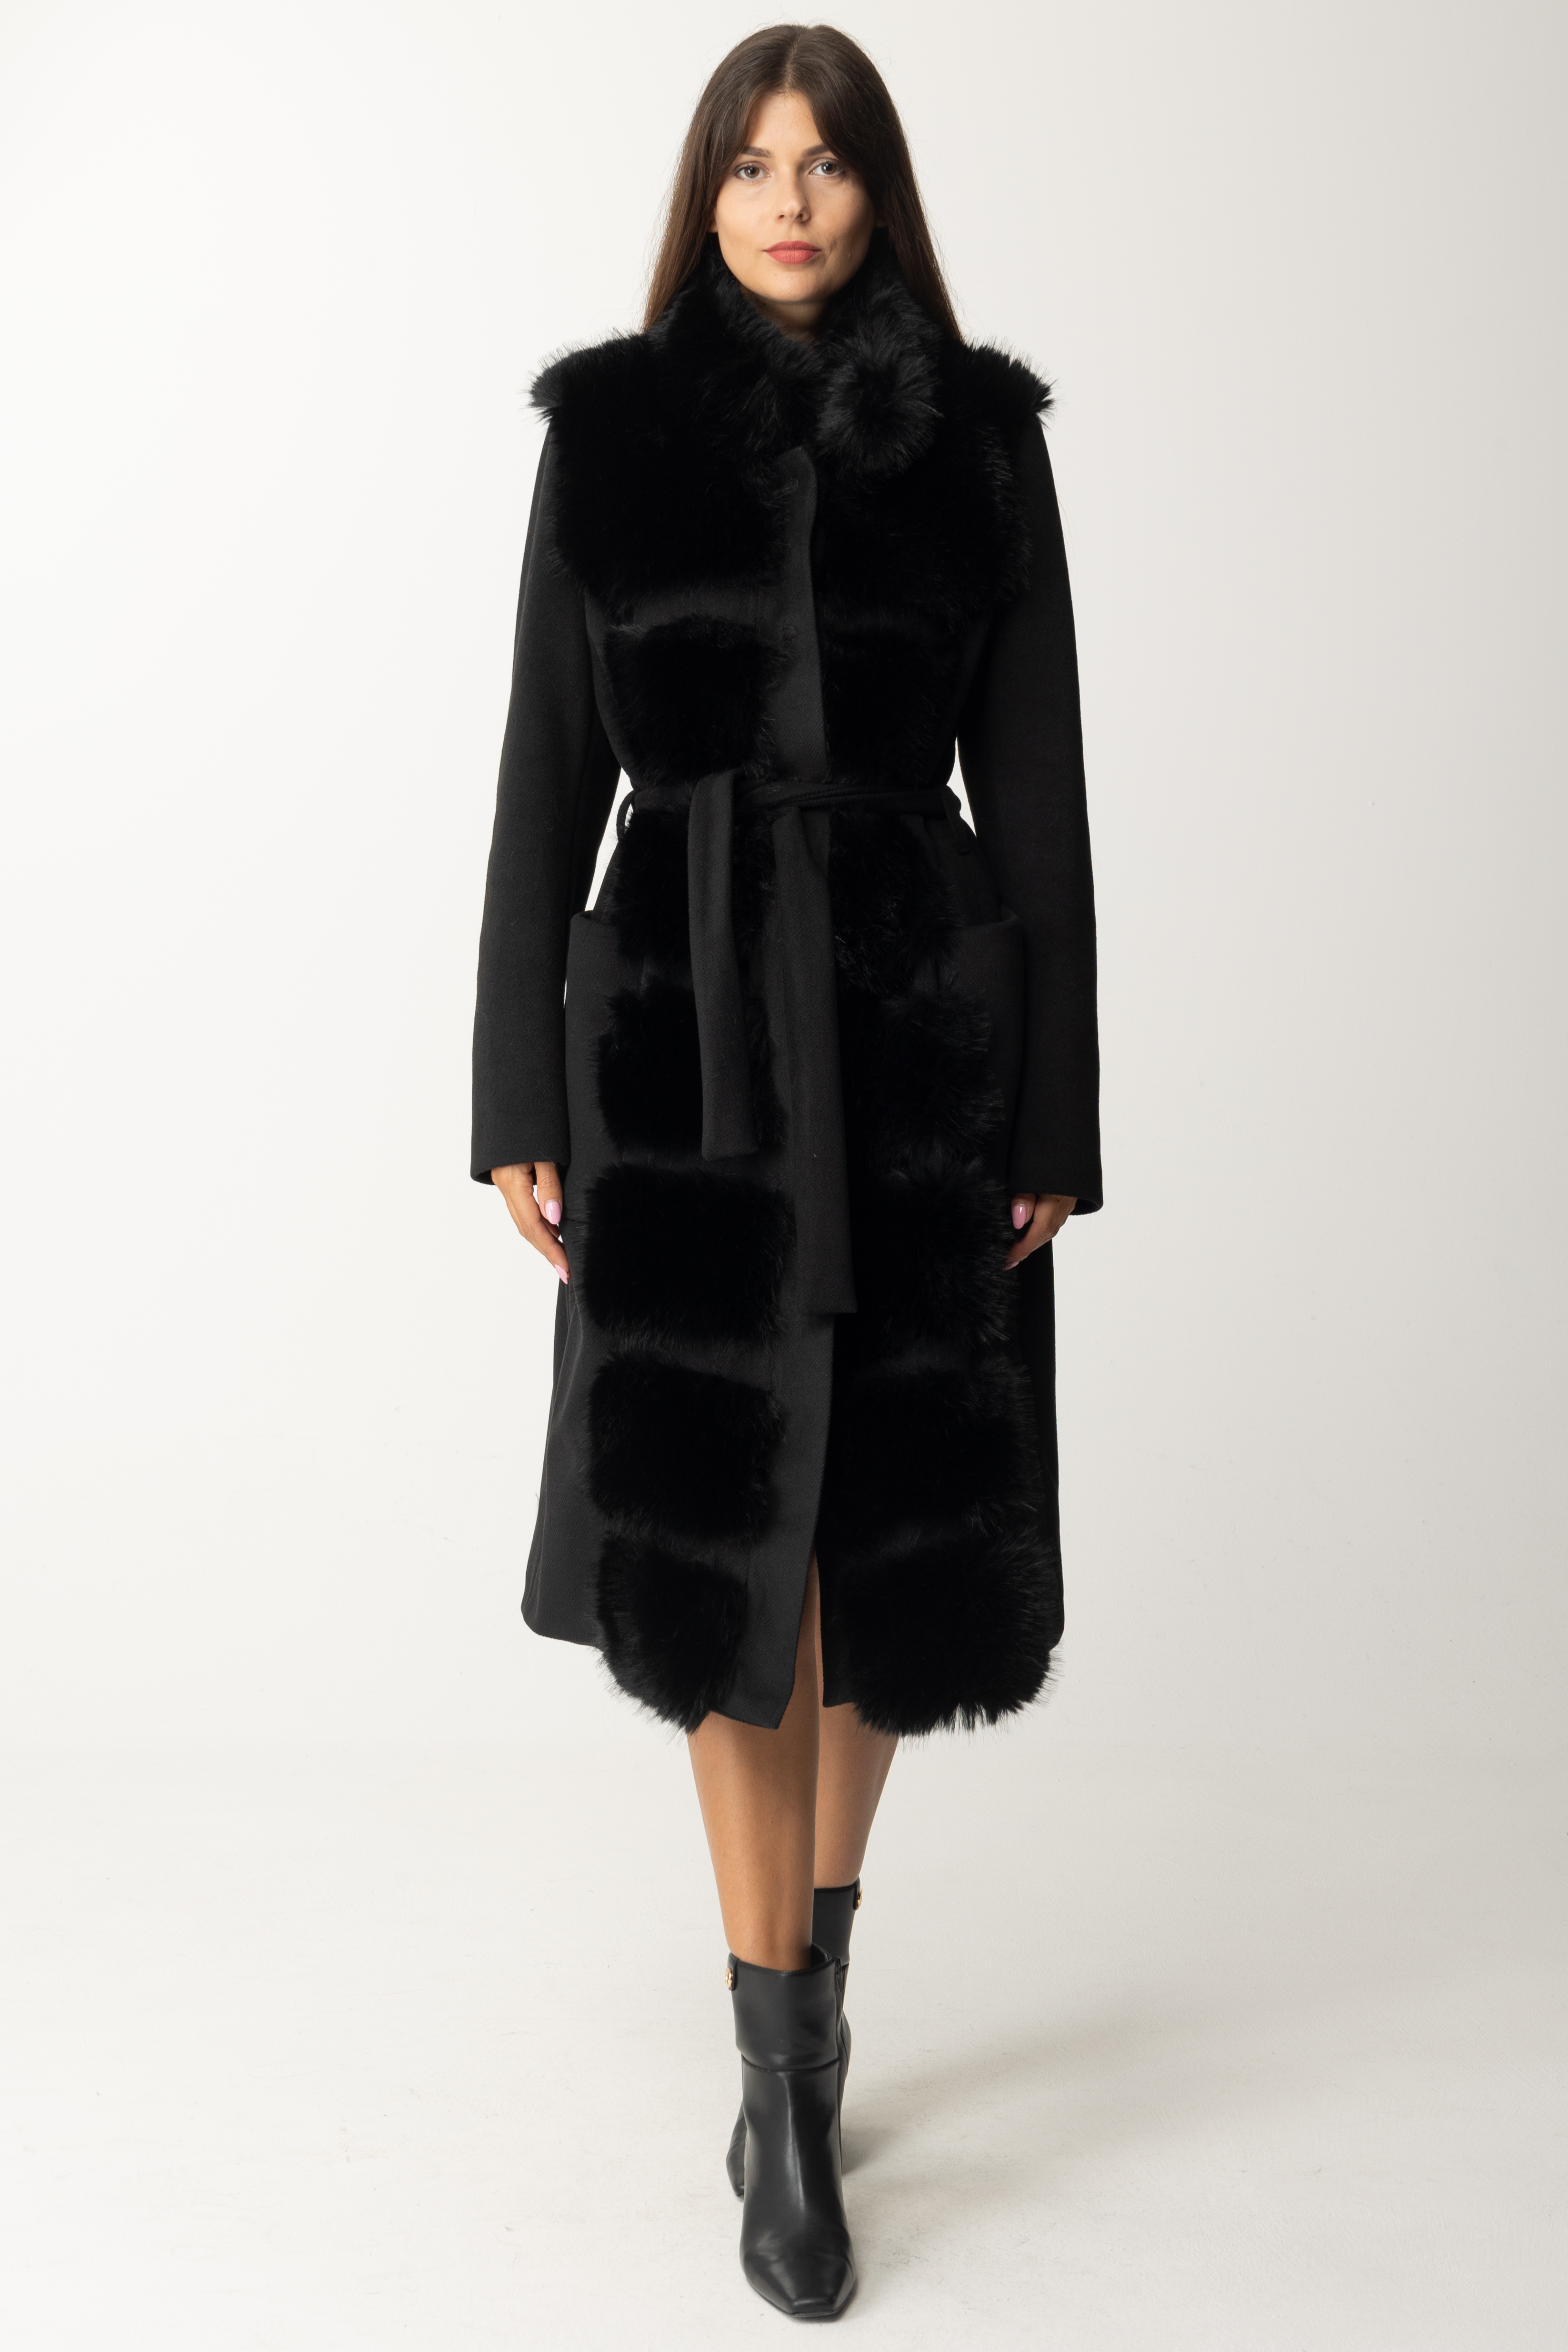 Preview: Yes London Coat with belt at the waist and faux fur inserts Nero